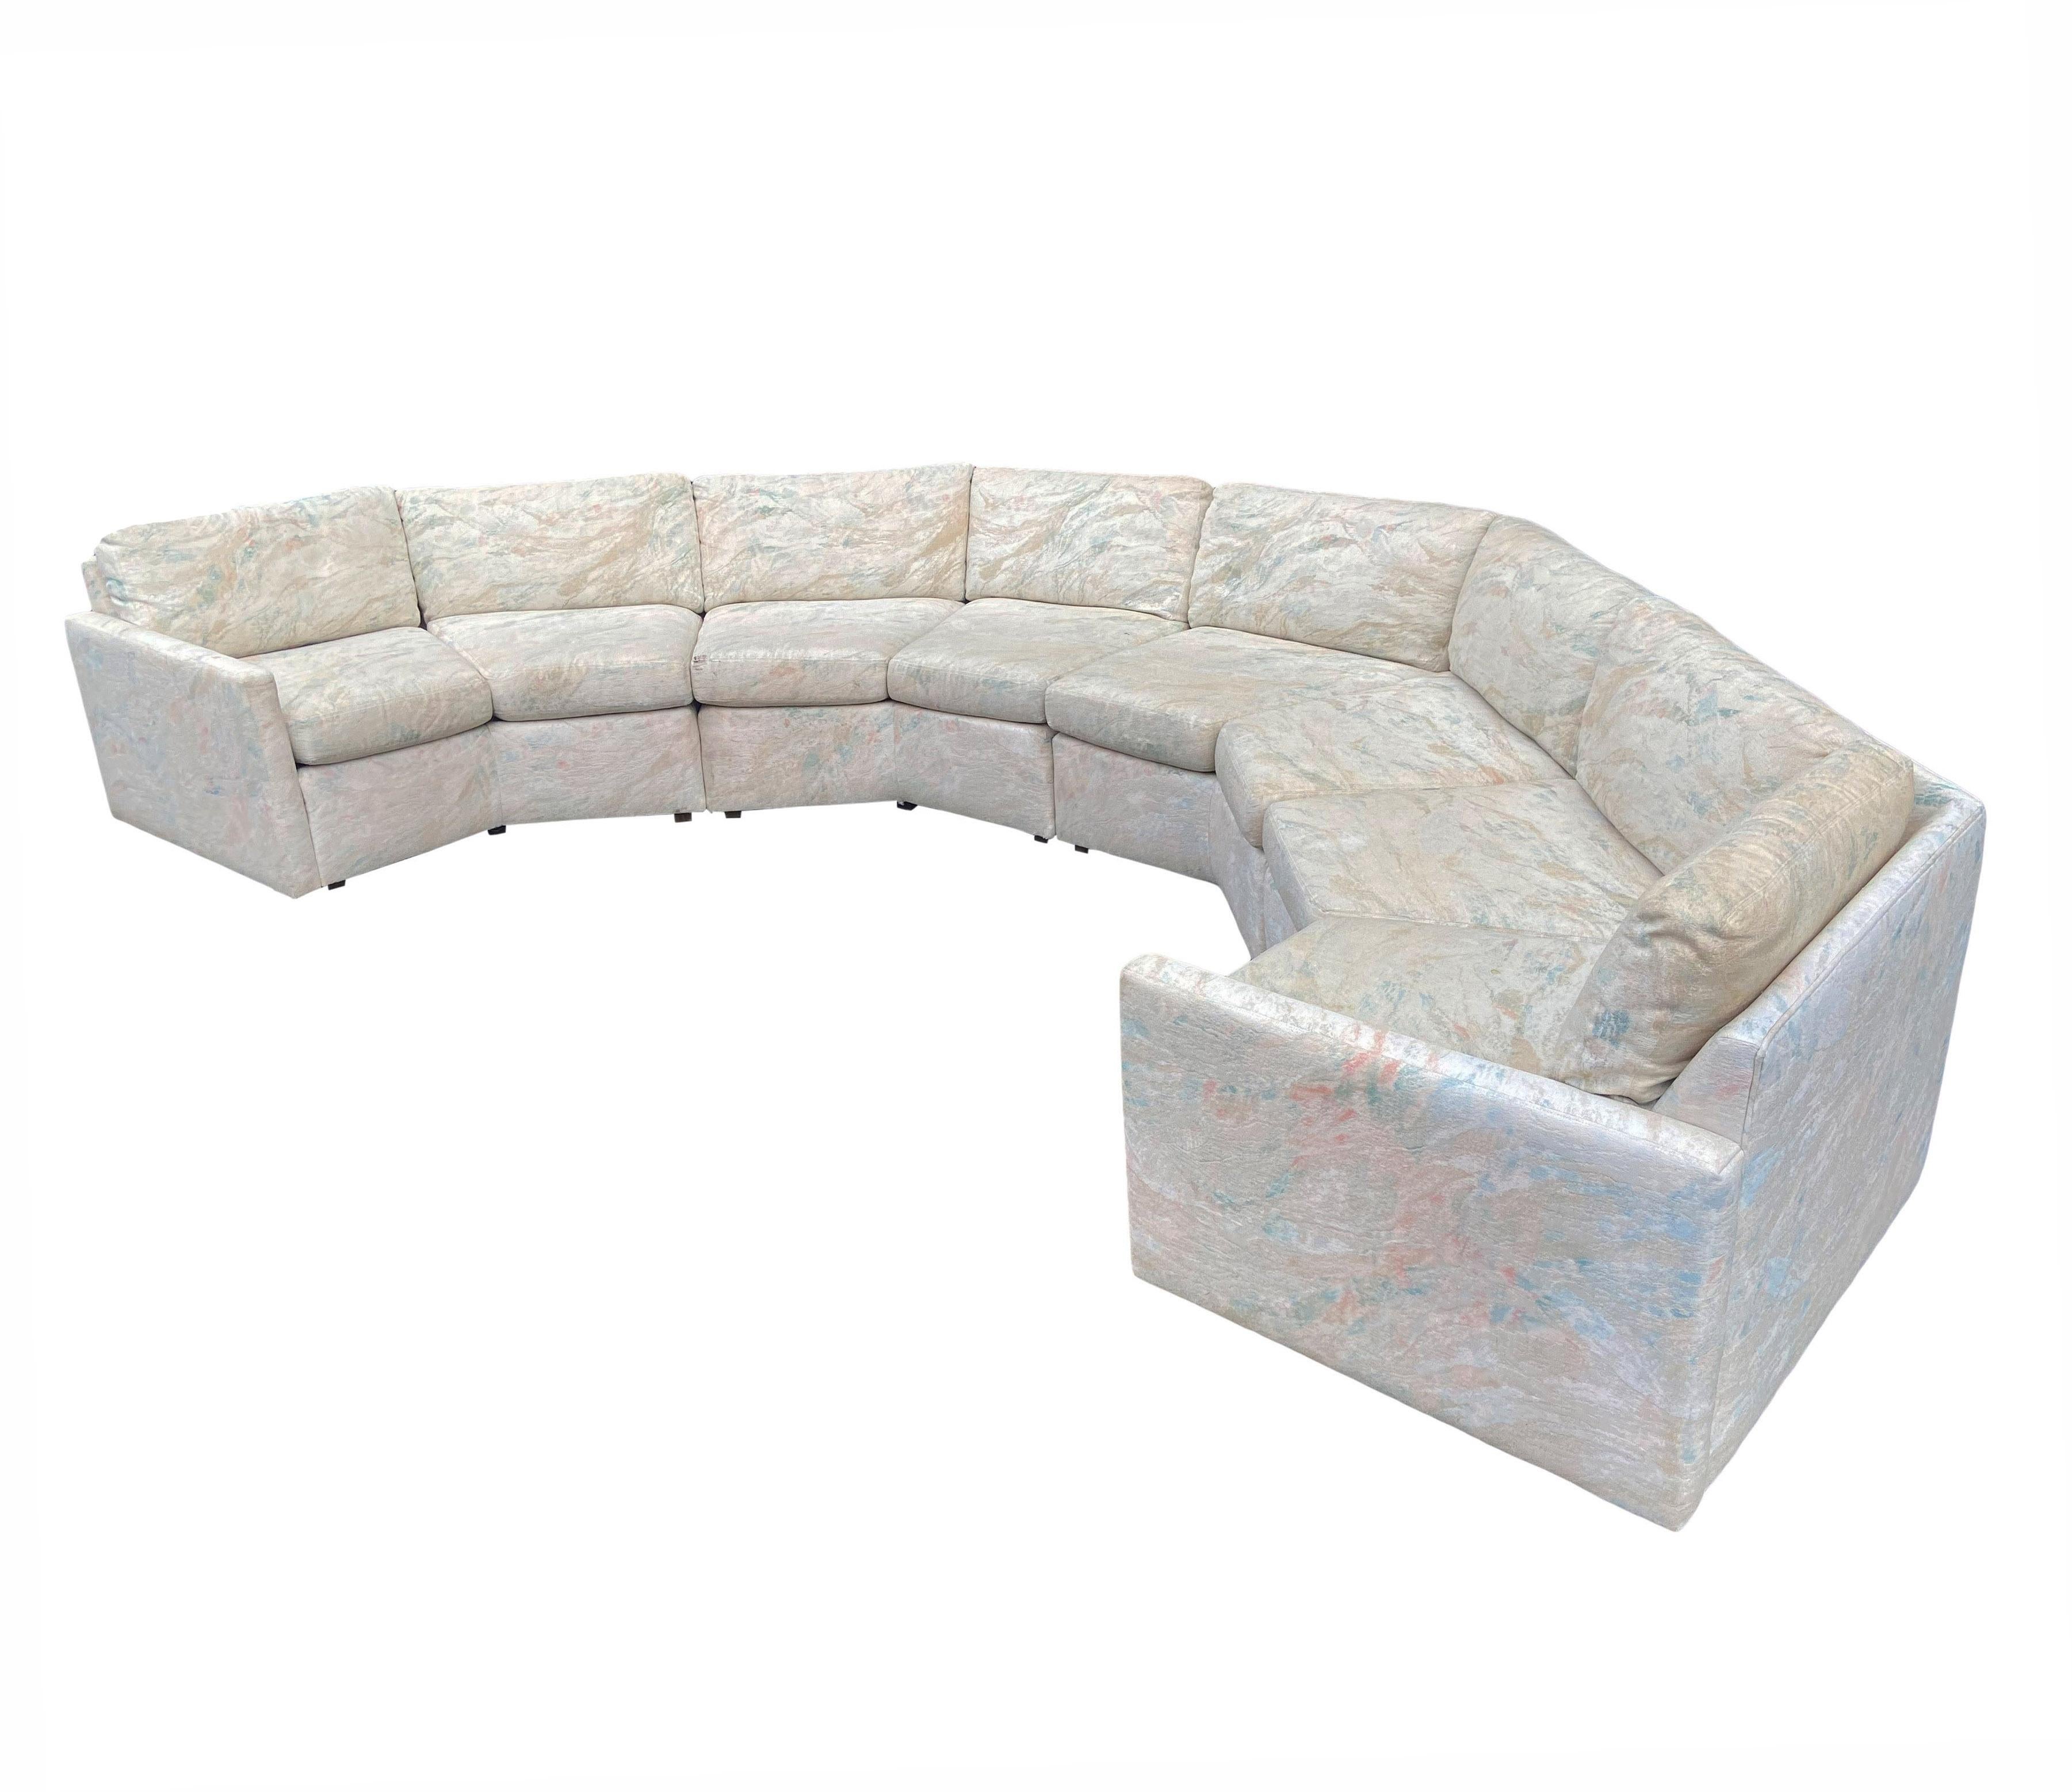 Late 20th Century Mid-Century Modern Curved Semi-Circular Sectional Sofa by Bernhardt